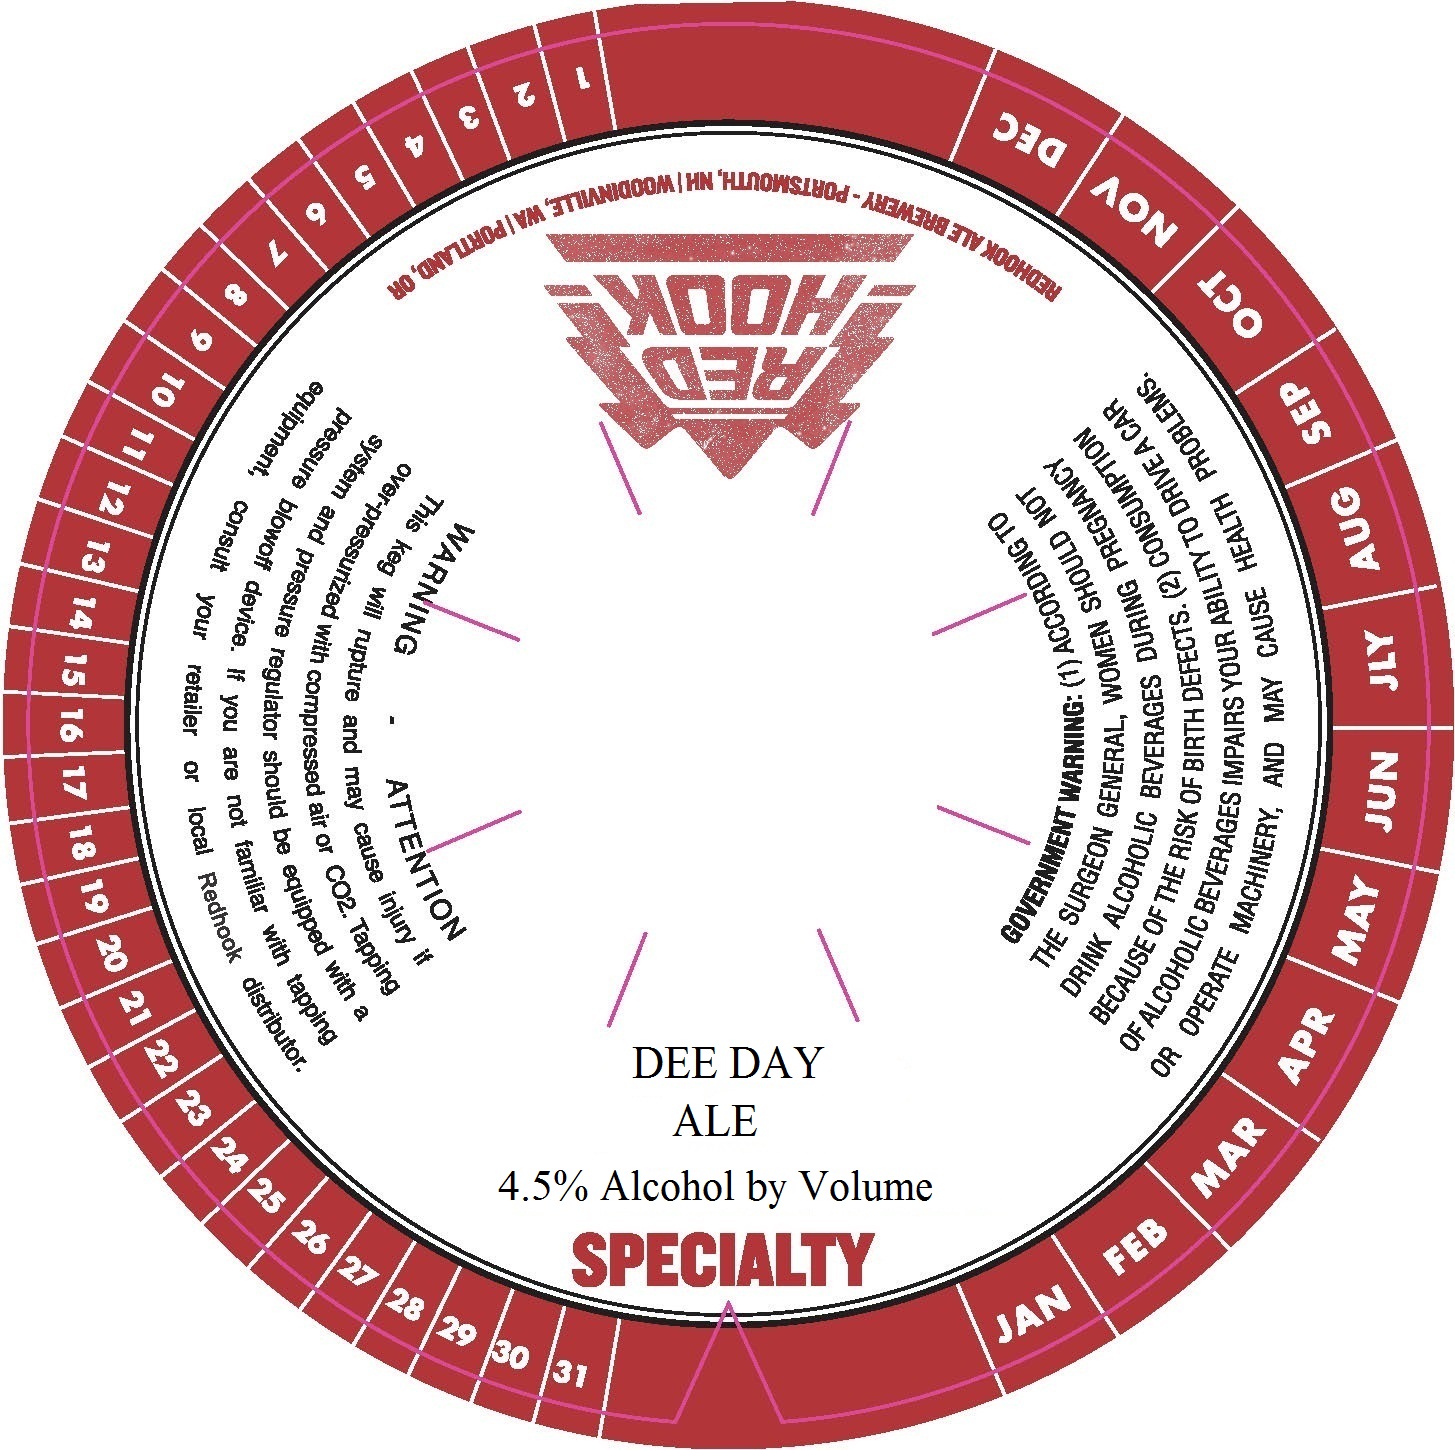 Redhook Dee Day Ale